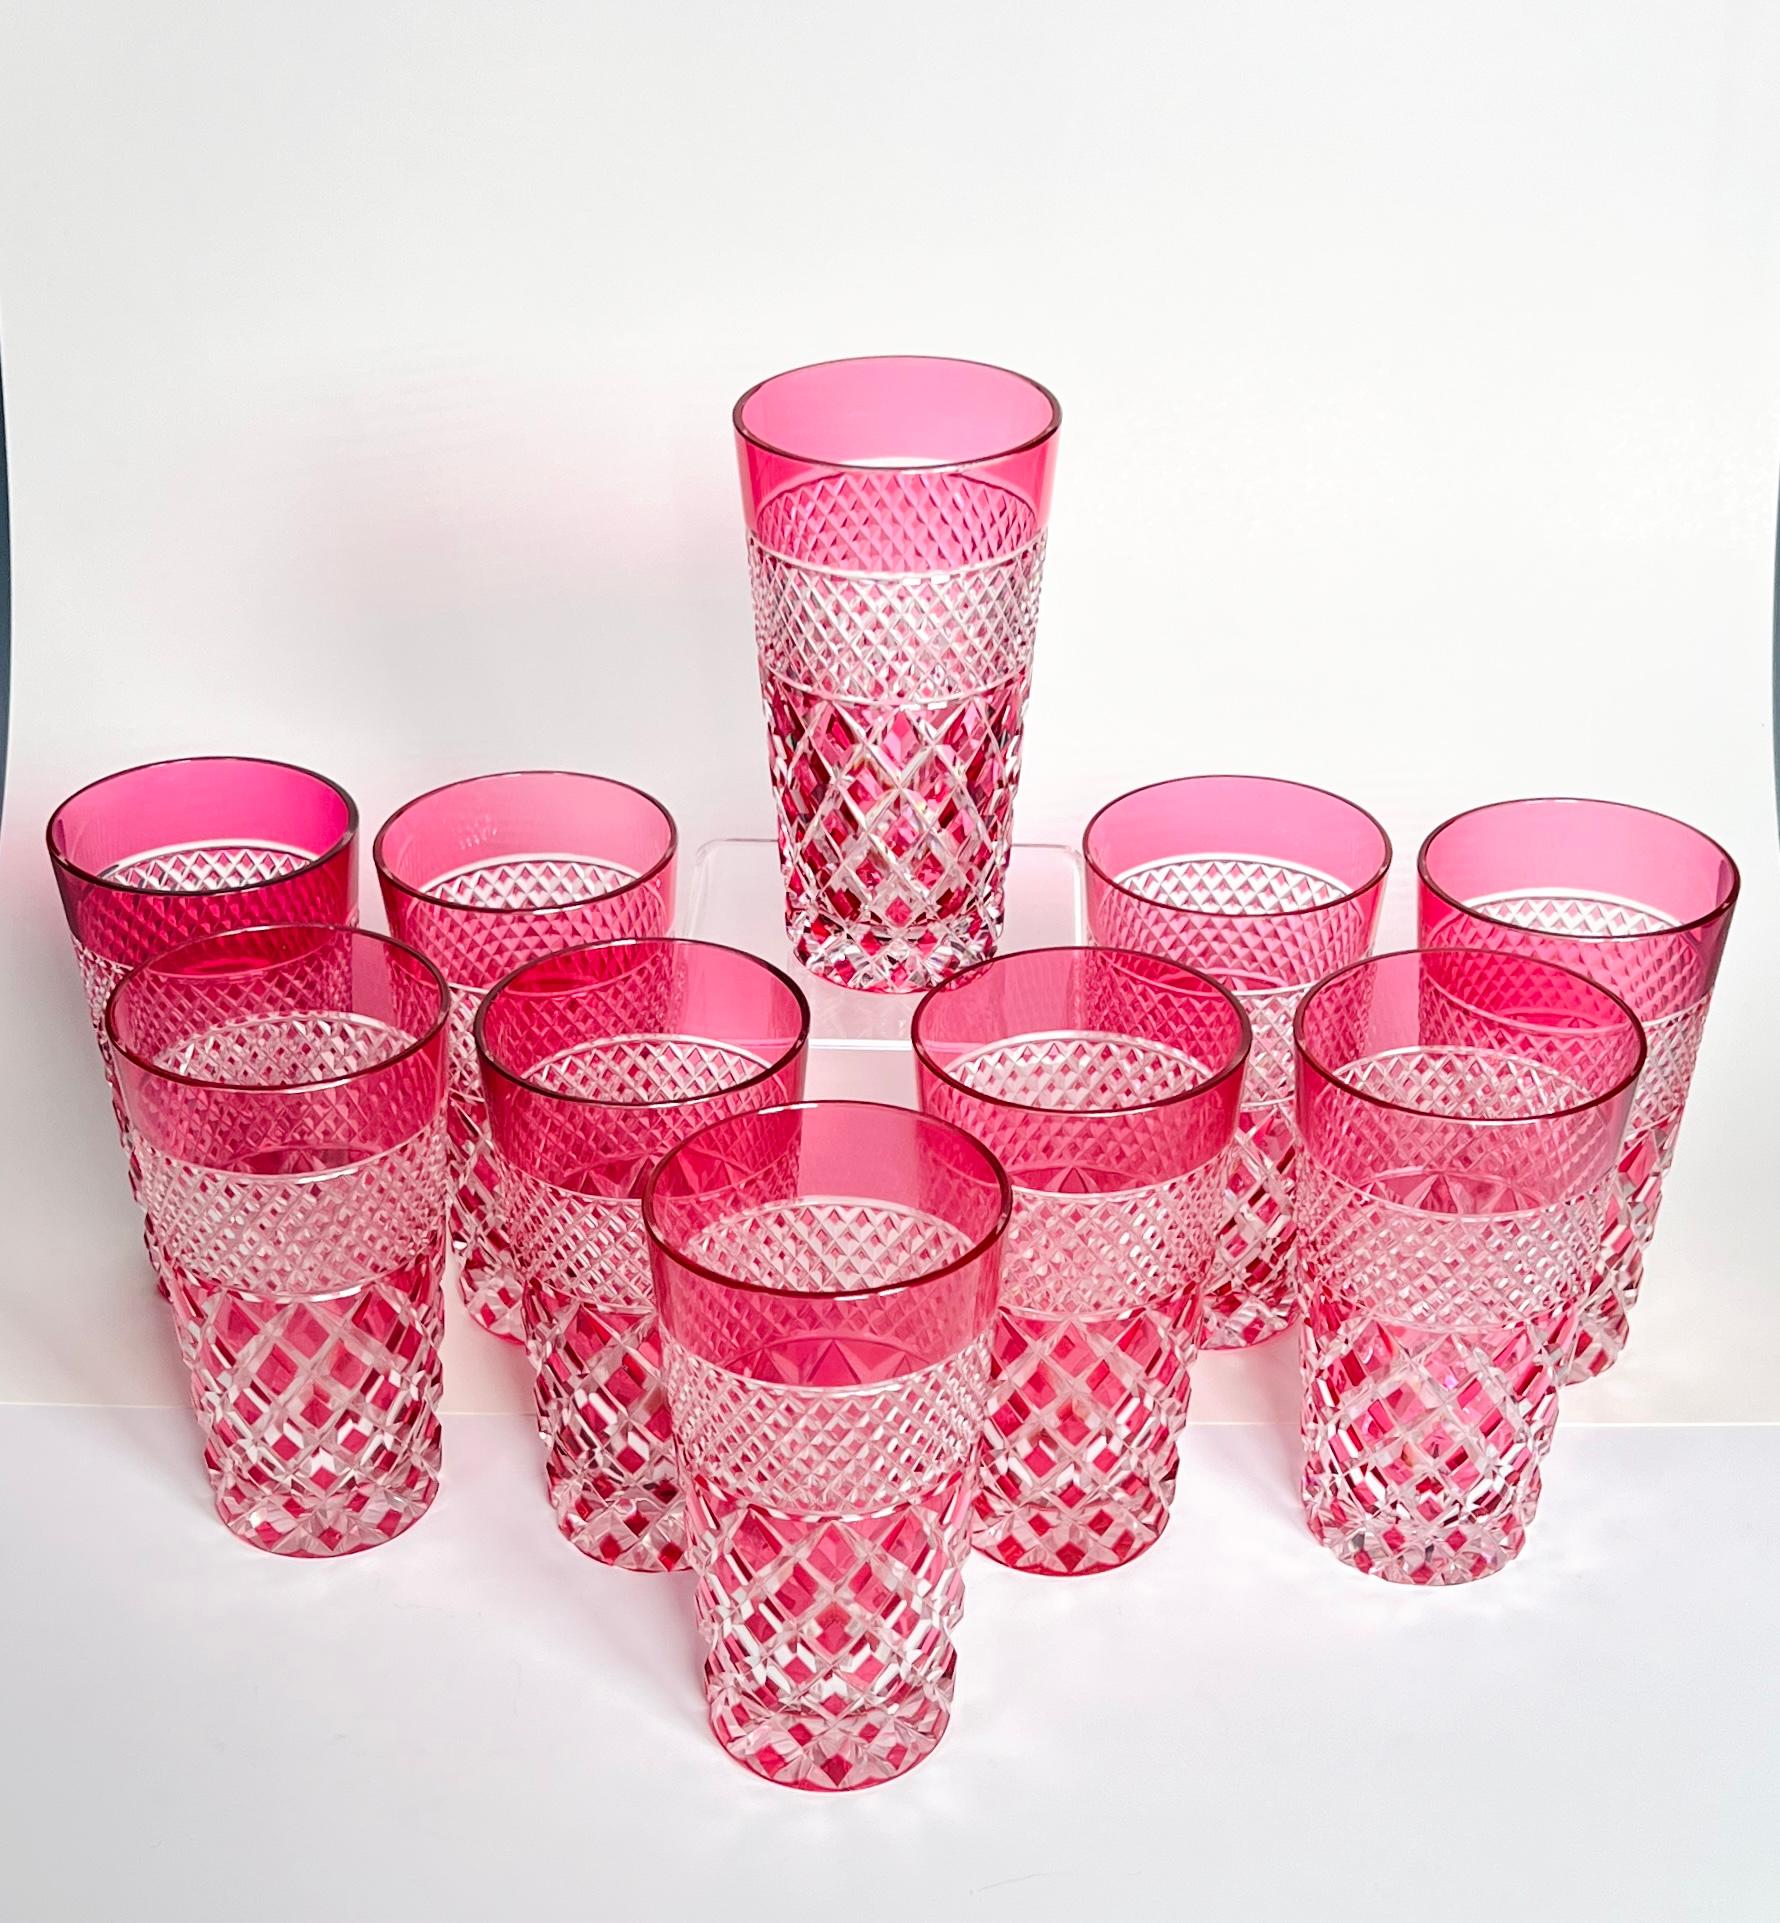 Elevate your table setting with these antique St. Louis crystal tumblers. The perfect size for your favorite beverage and the exquisite cranberry overlay is cut to clear in this classic diamond pattern. These feel great in the hand and will also